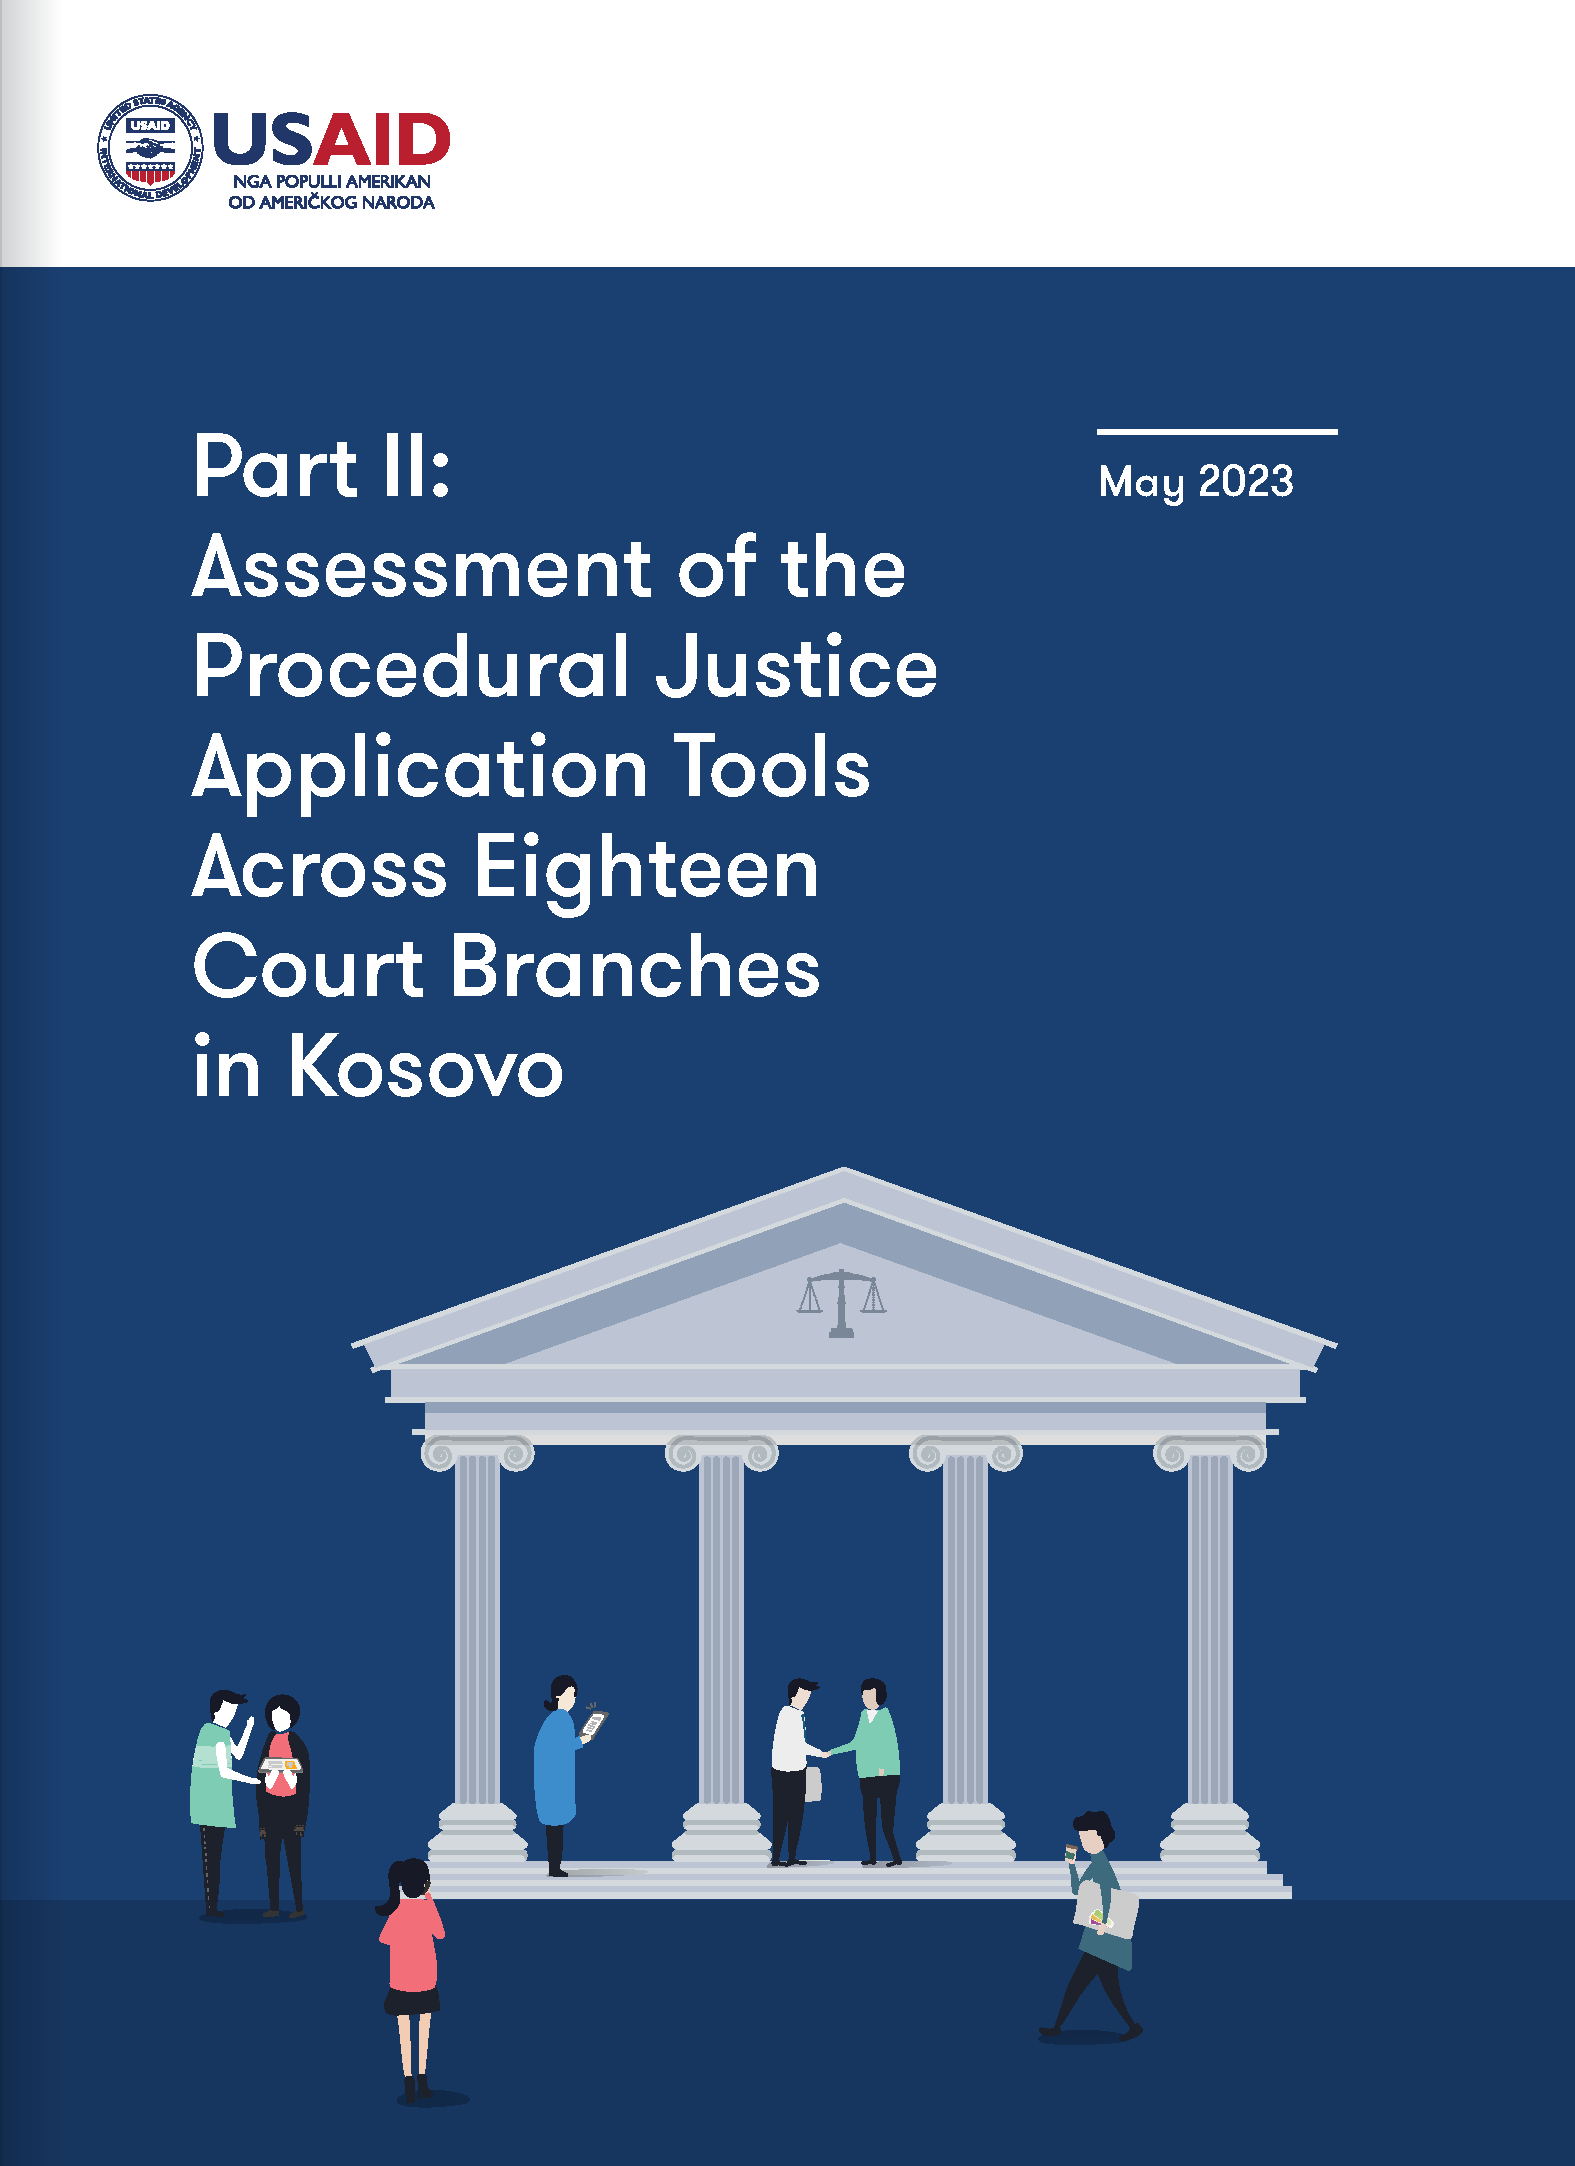 Part II: Assessment of the Procedural Justice Application Tools Across Eighteen Court Branches in Kosovo